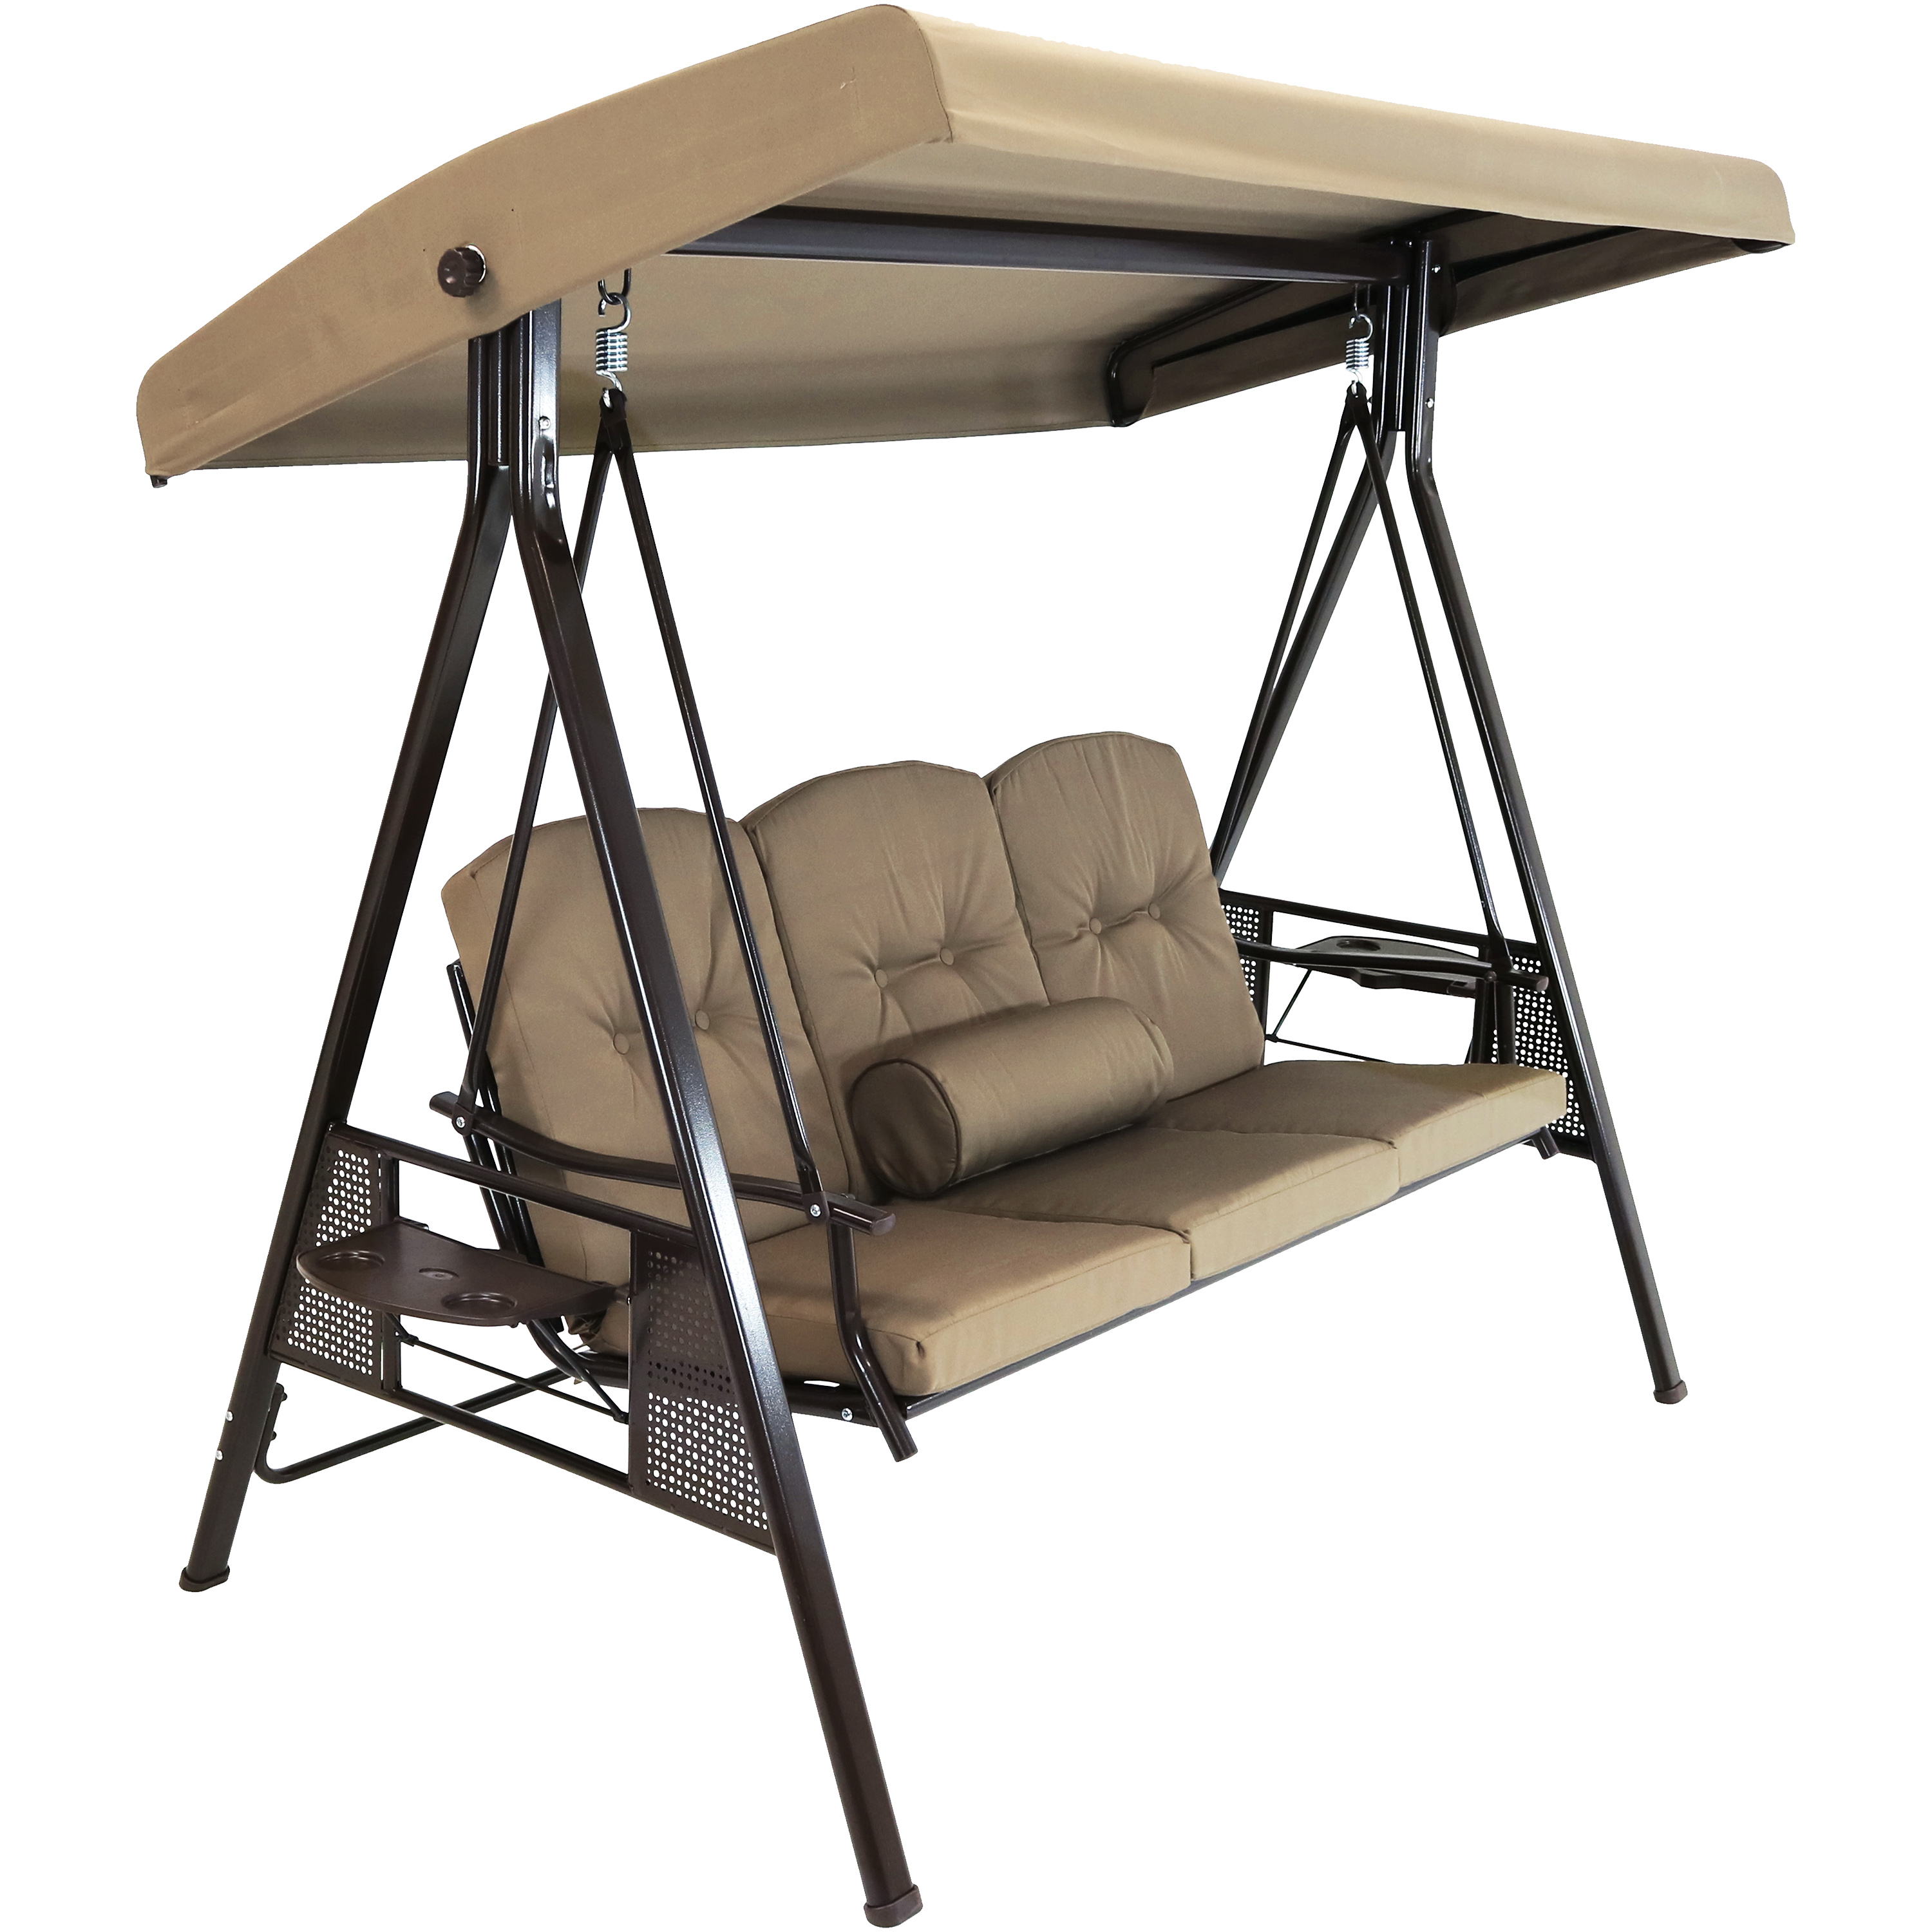 Sunnydaze 3-Person Patio Swing with Adjustable Canopy and Cushions - Beige - image 1 of 9